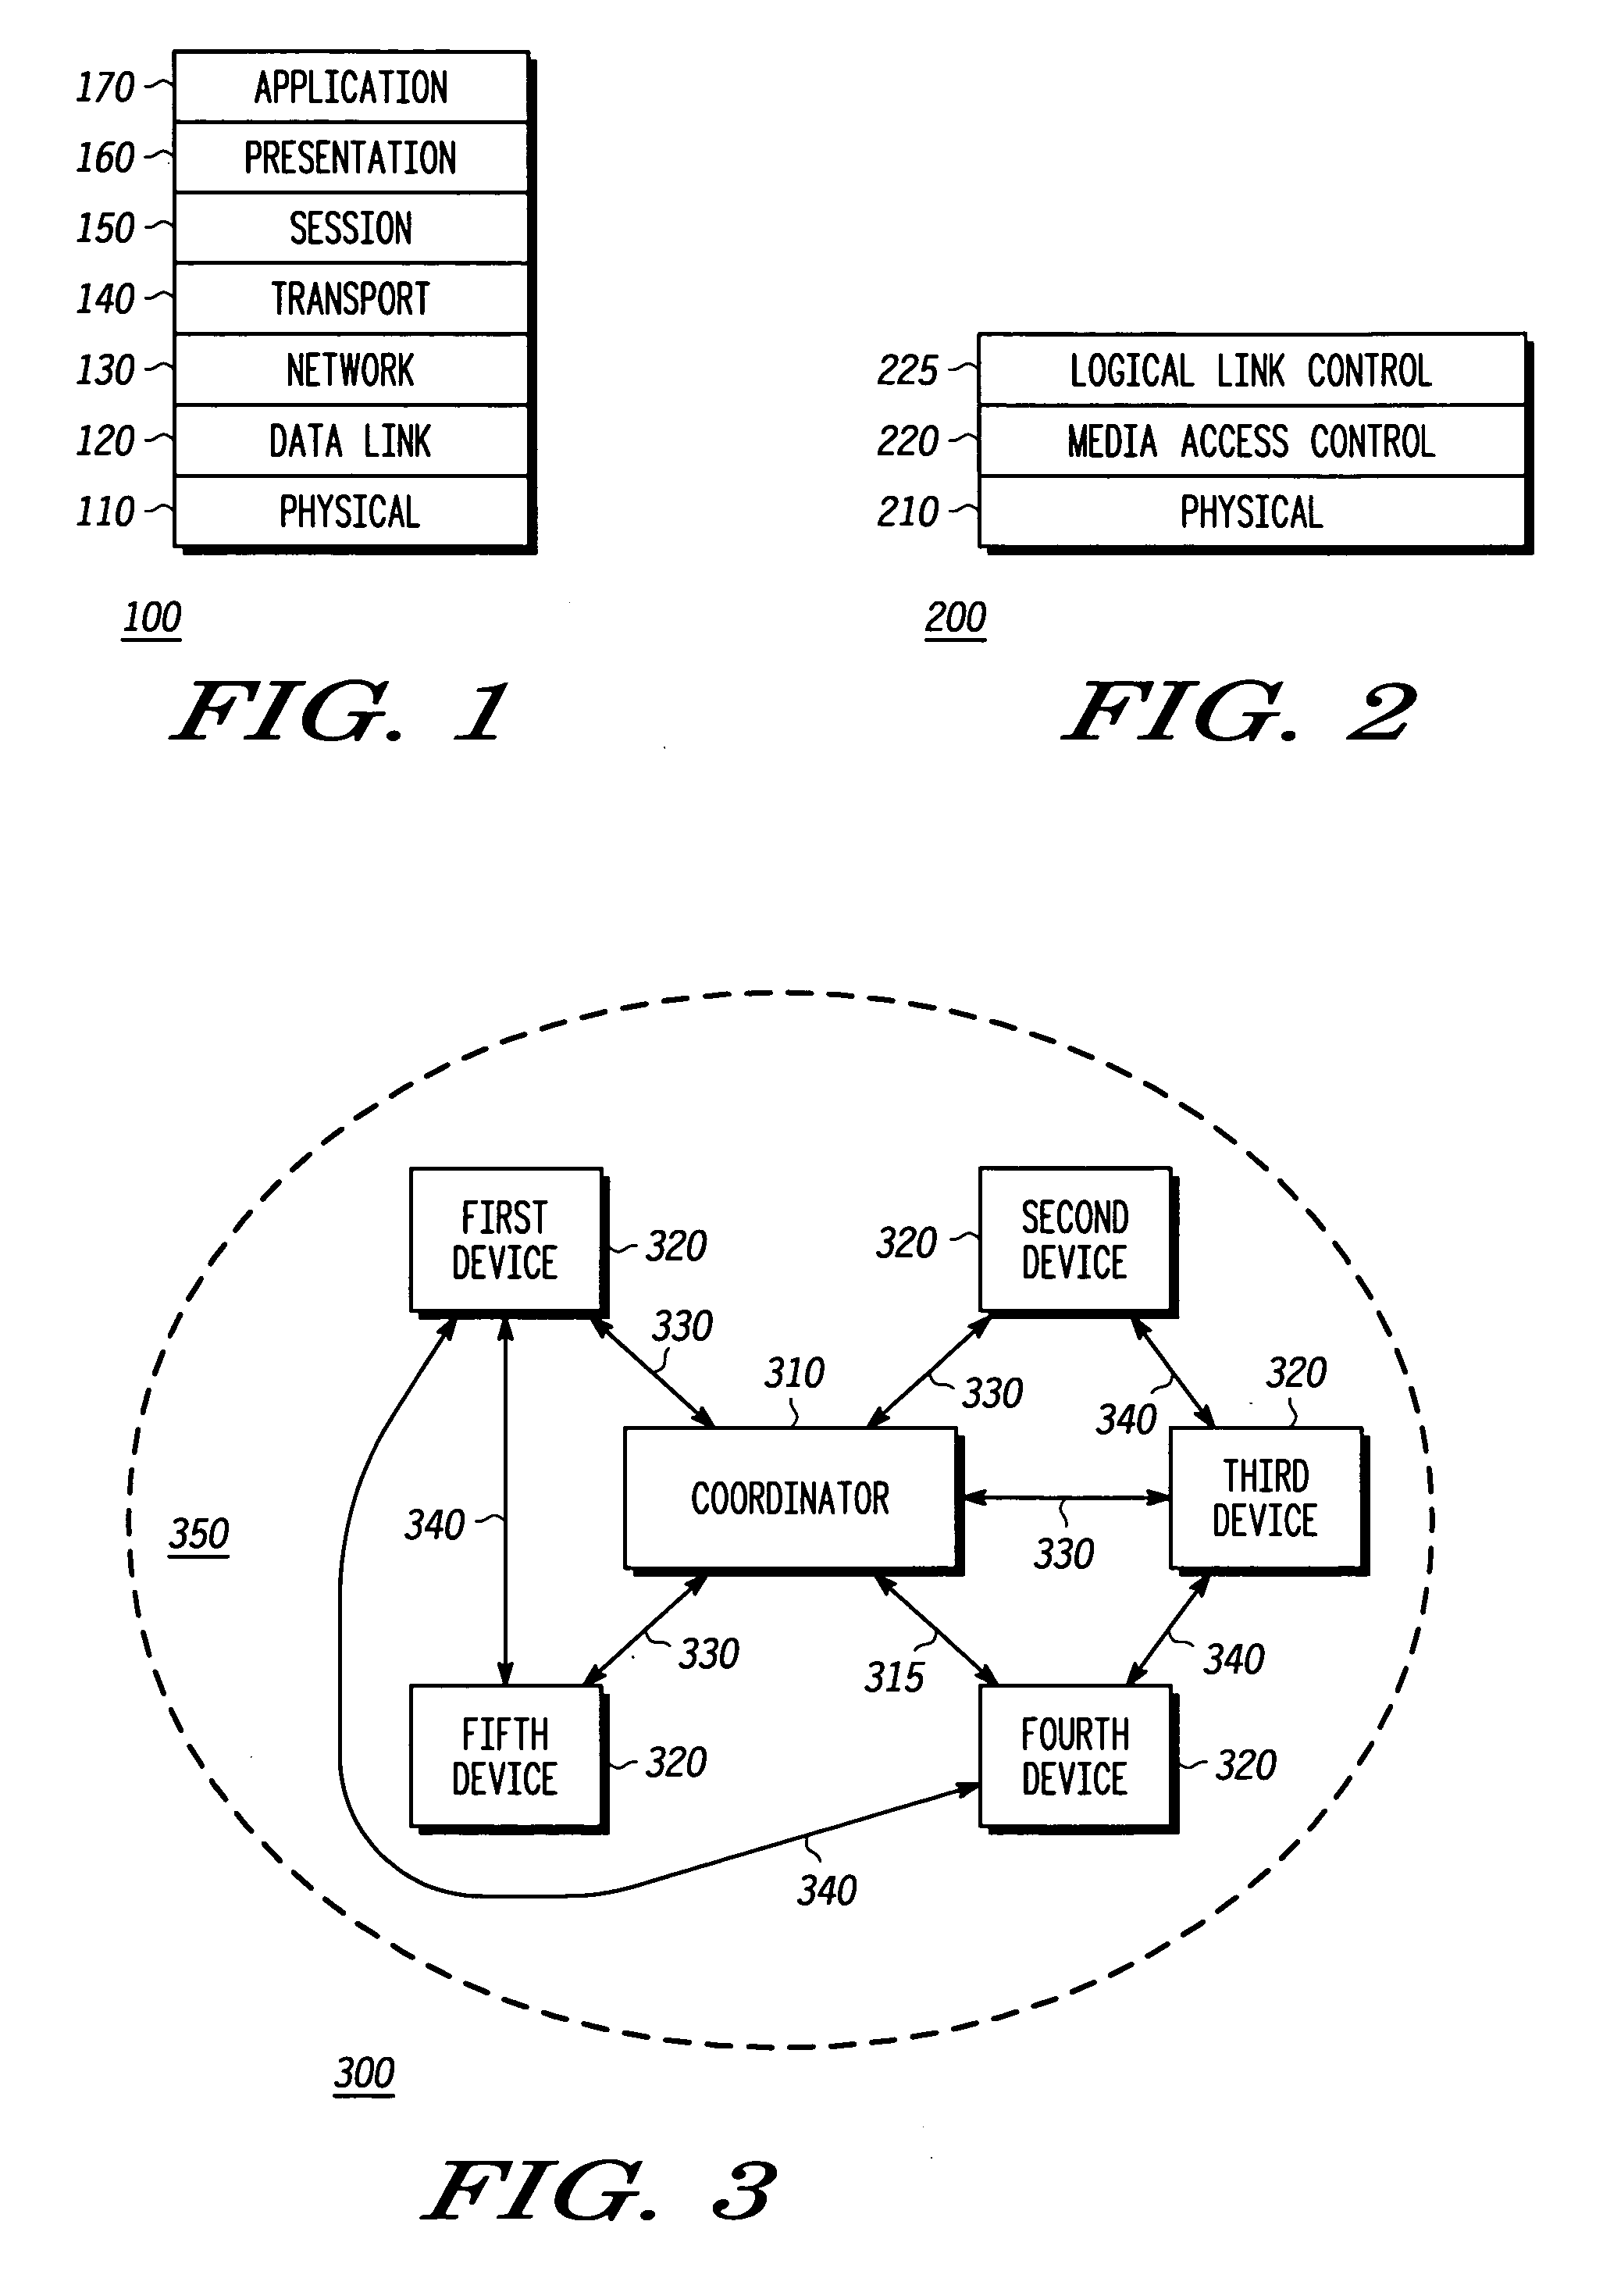 Common signalling mode for use with multiple wireless formats